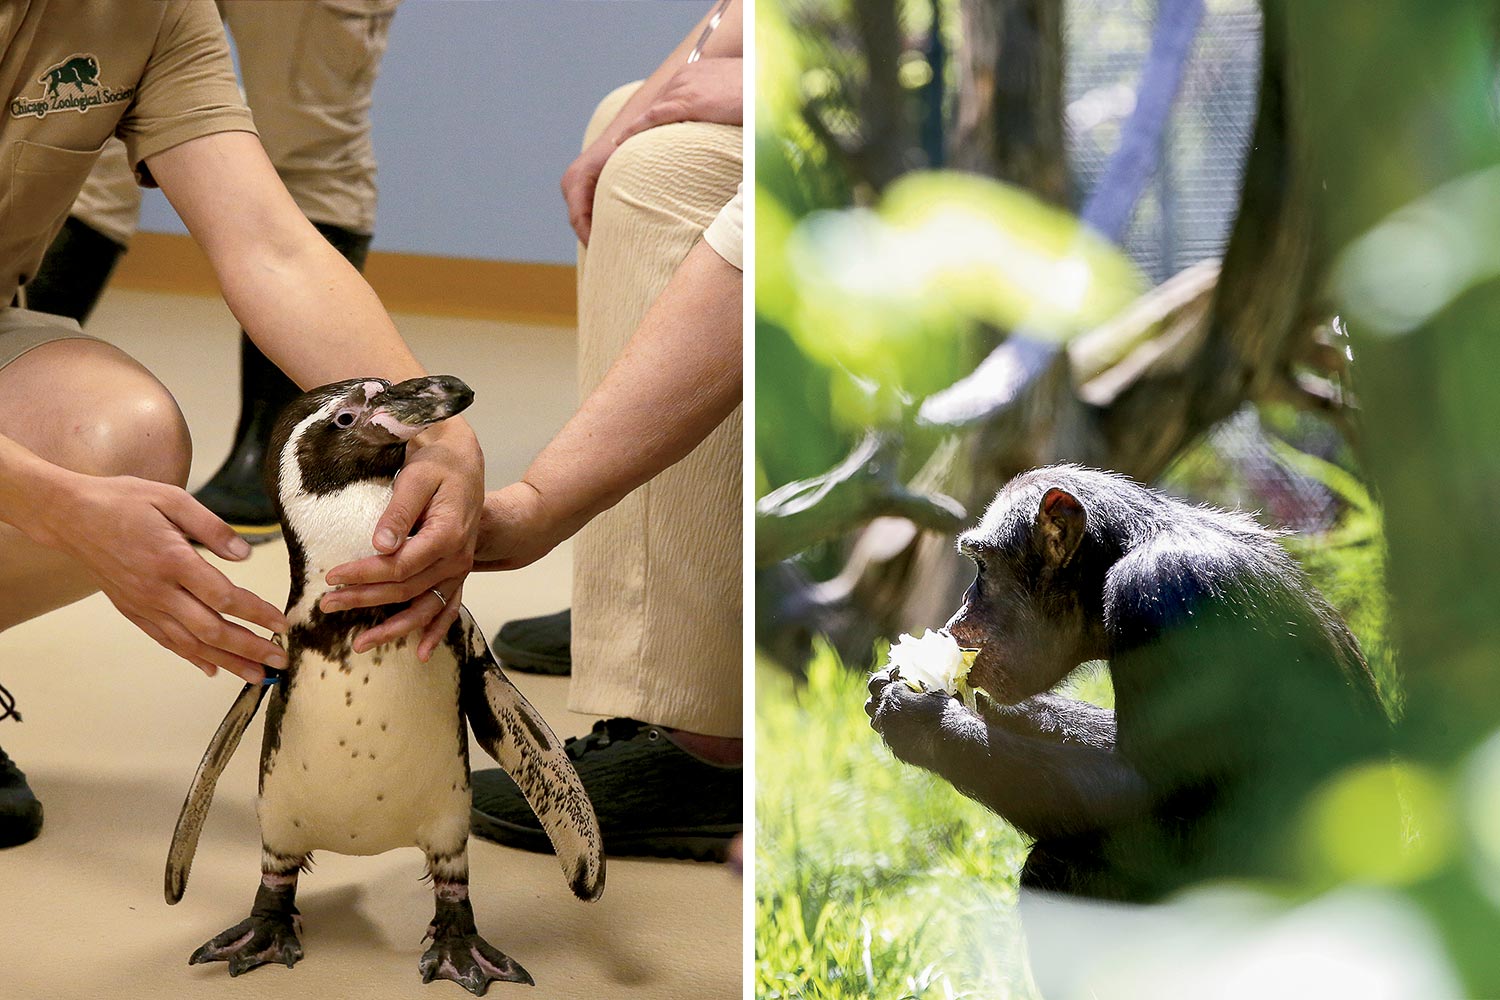 A penguin at Brookfield Zoo and a gorilla at Lincoln Park Zoo